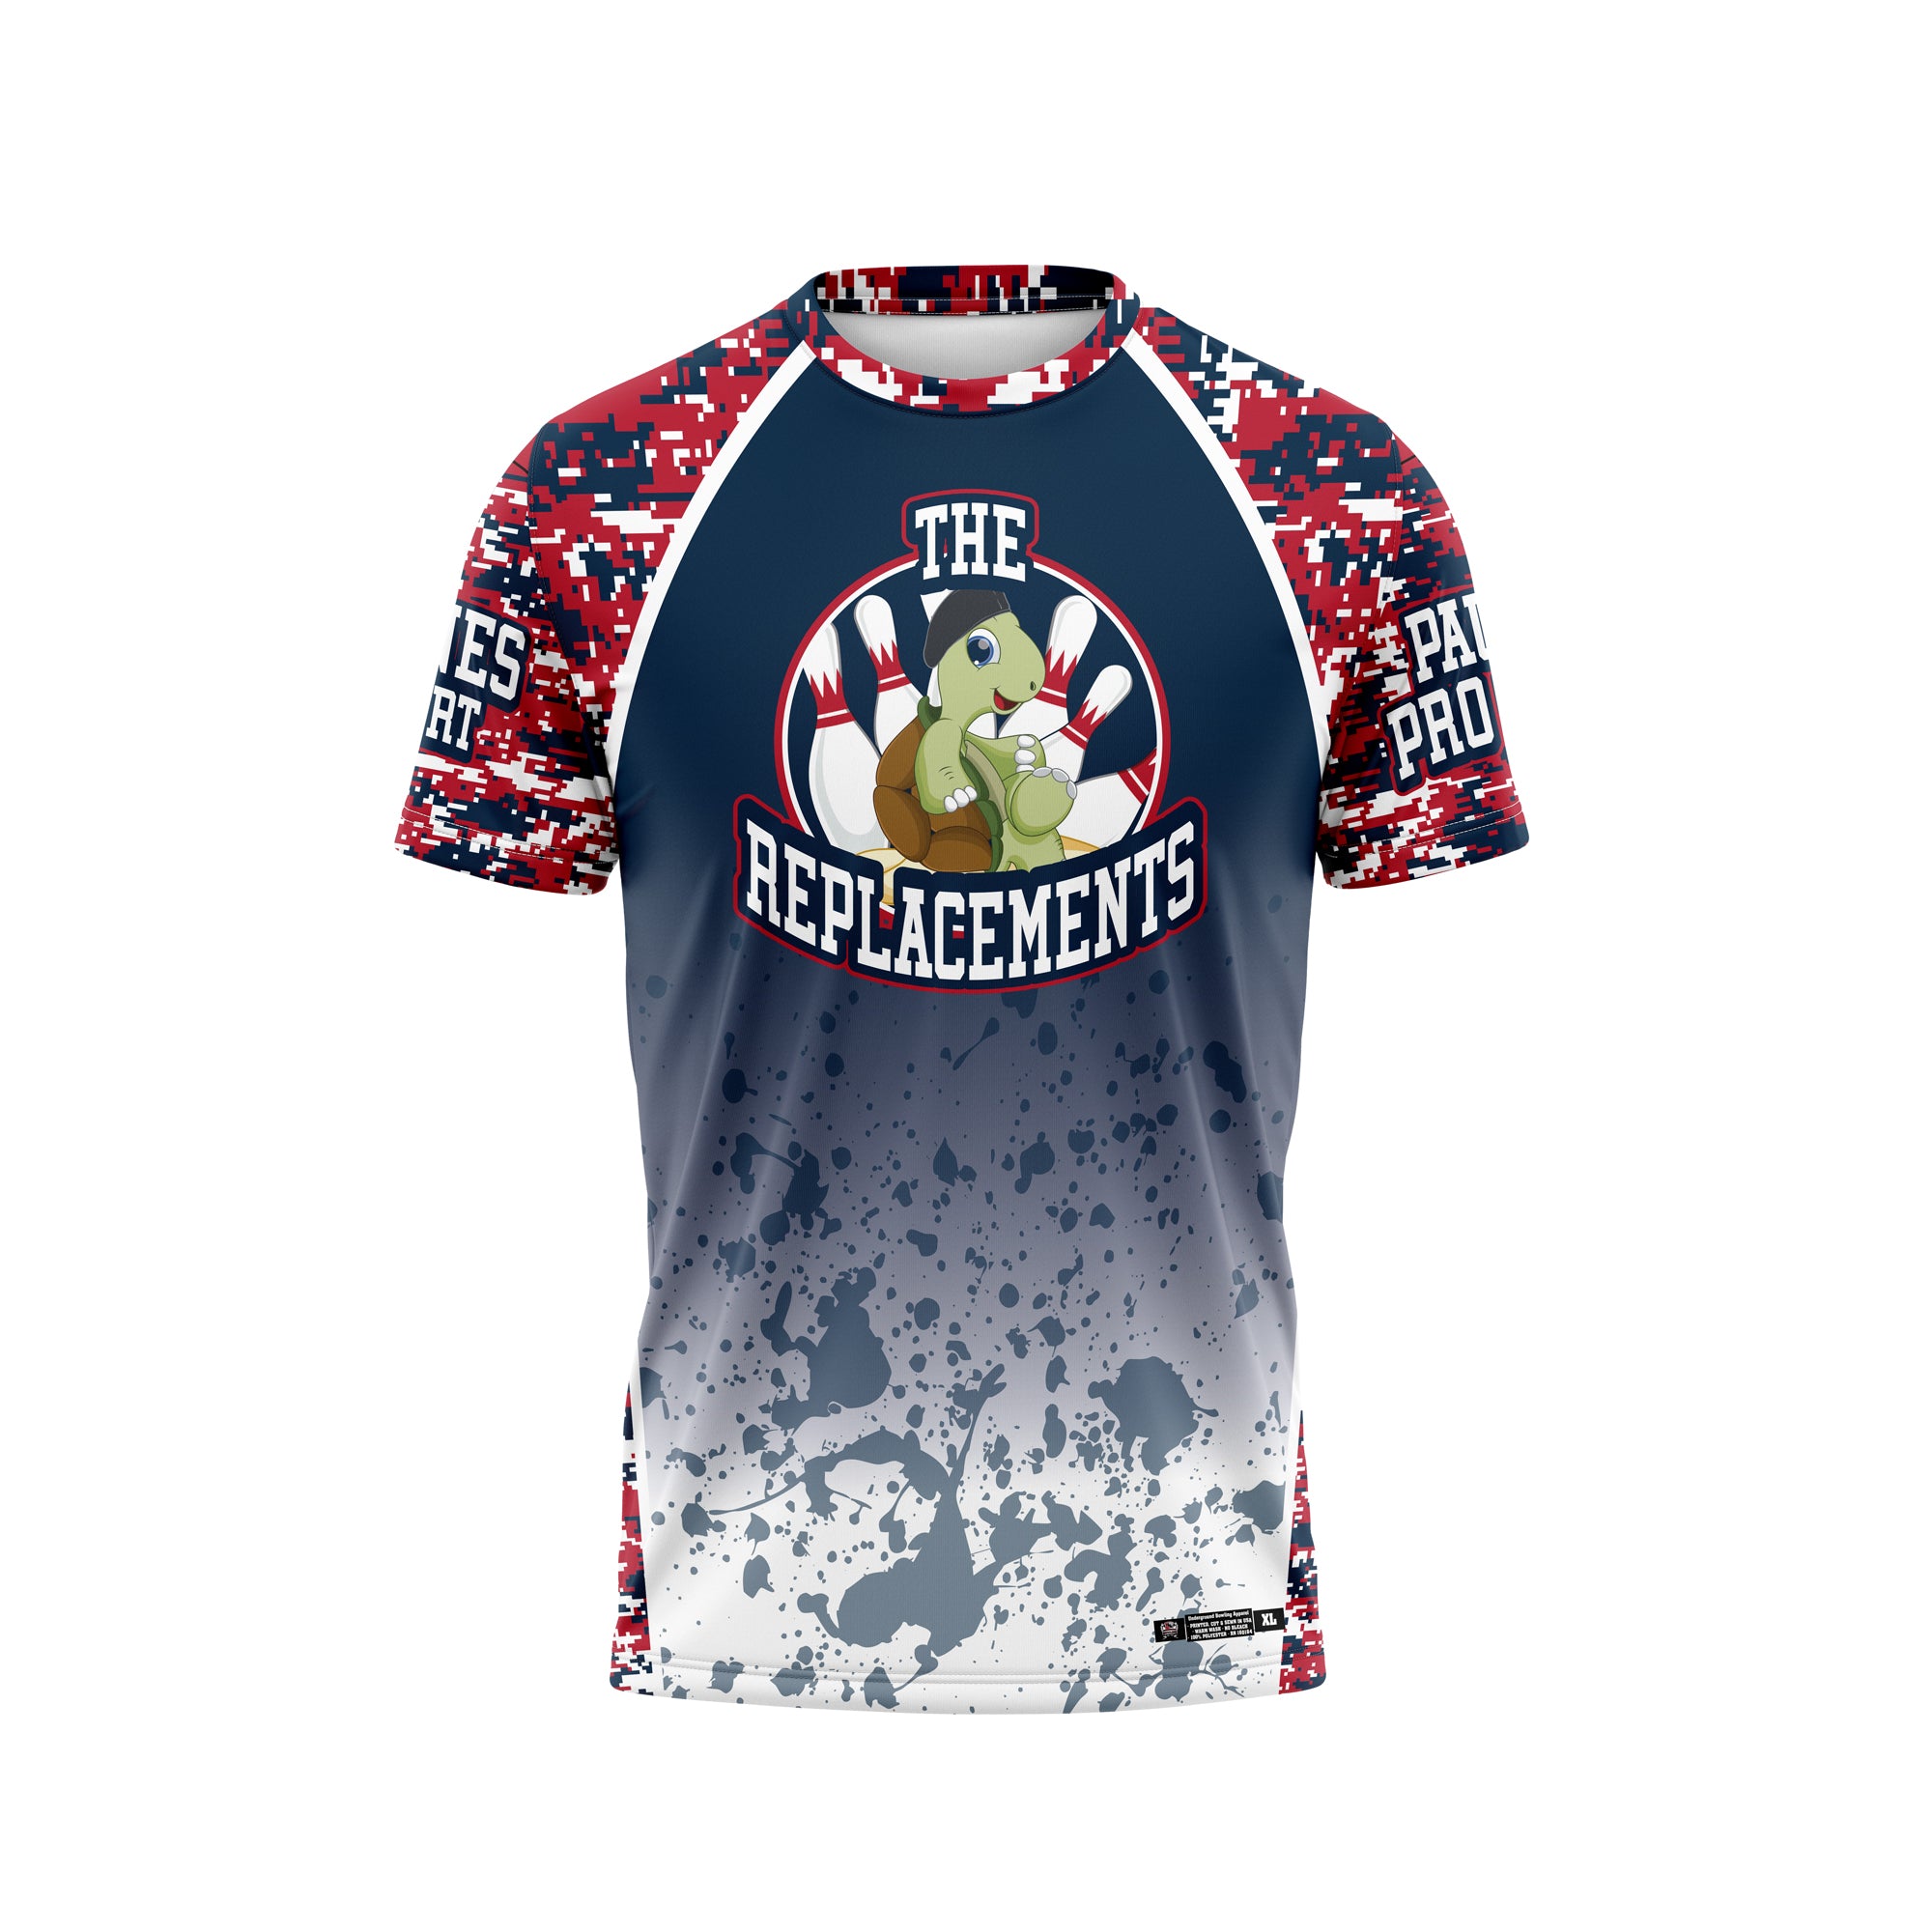 The Replacements Camo Jersey